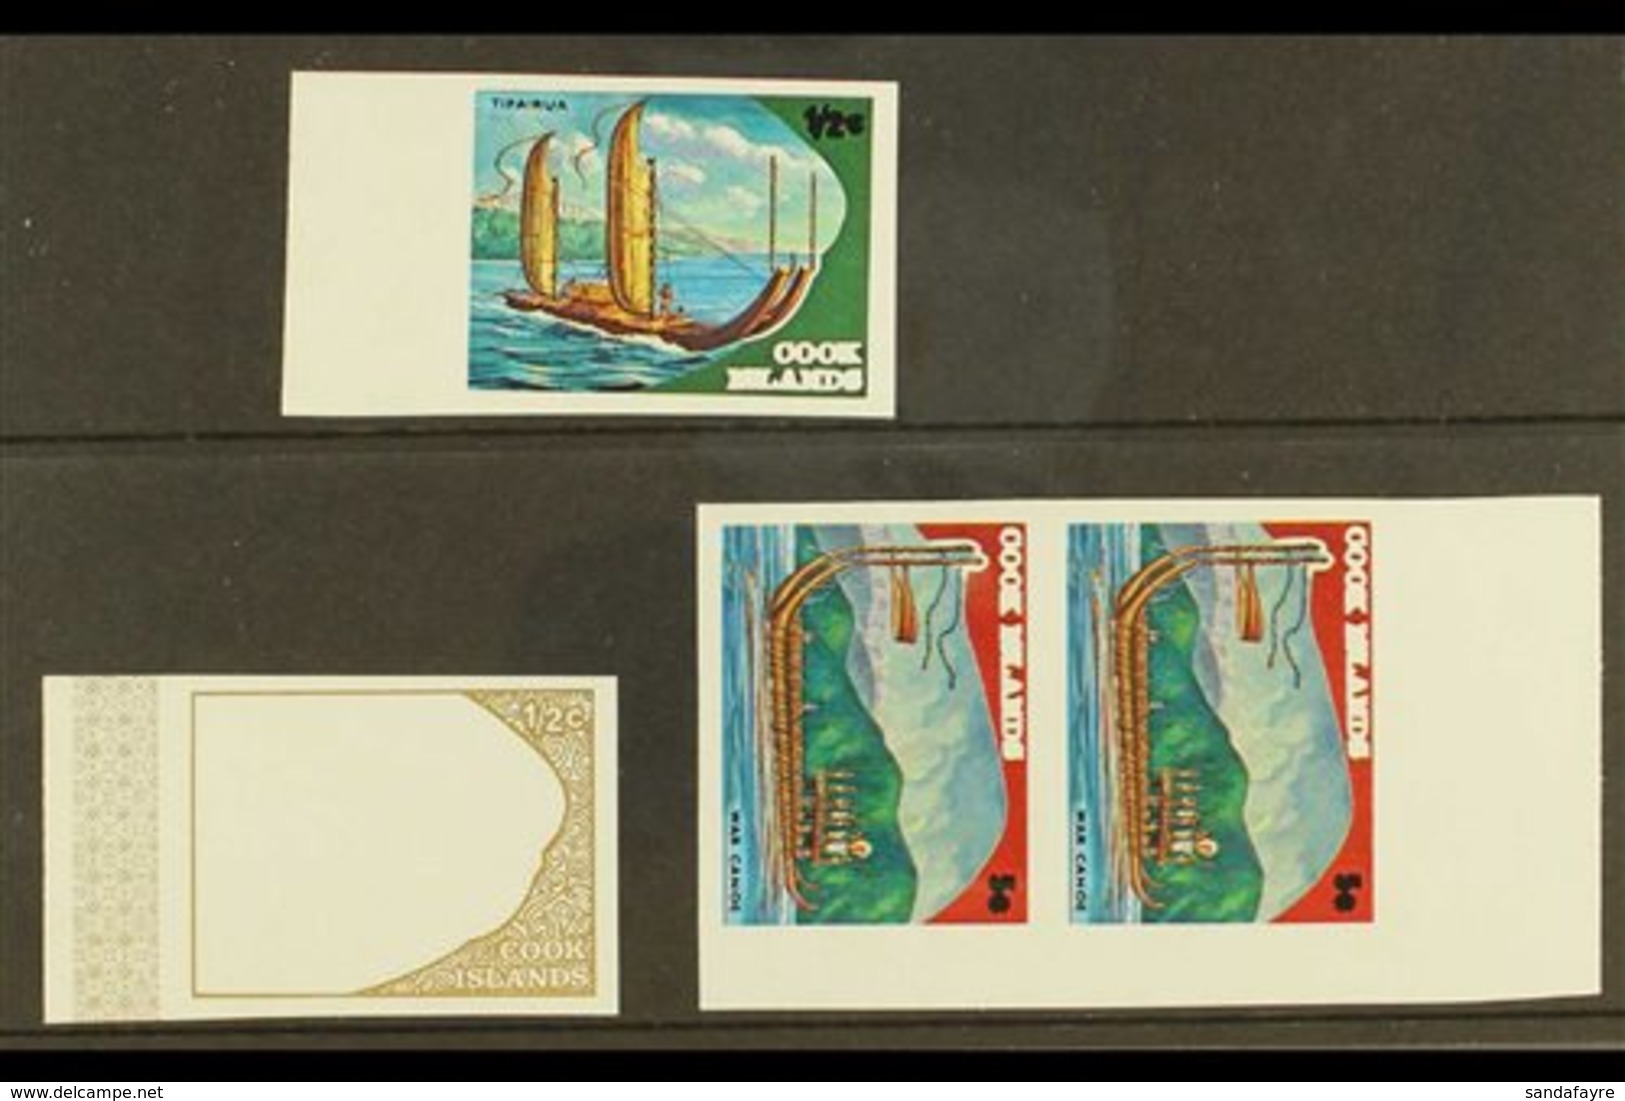 \Y 1973 IMPERF PLATE PROOFS\Y An Attractive Selection From The Maori Exploration Issue With ½c Gold Frame & Coloured "Ti - Cook Islands